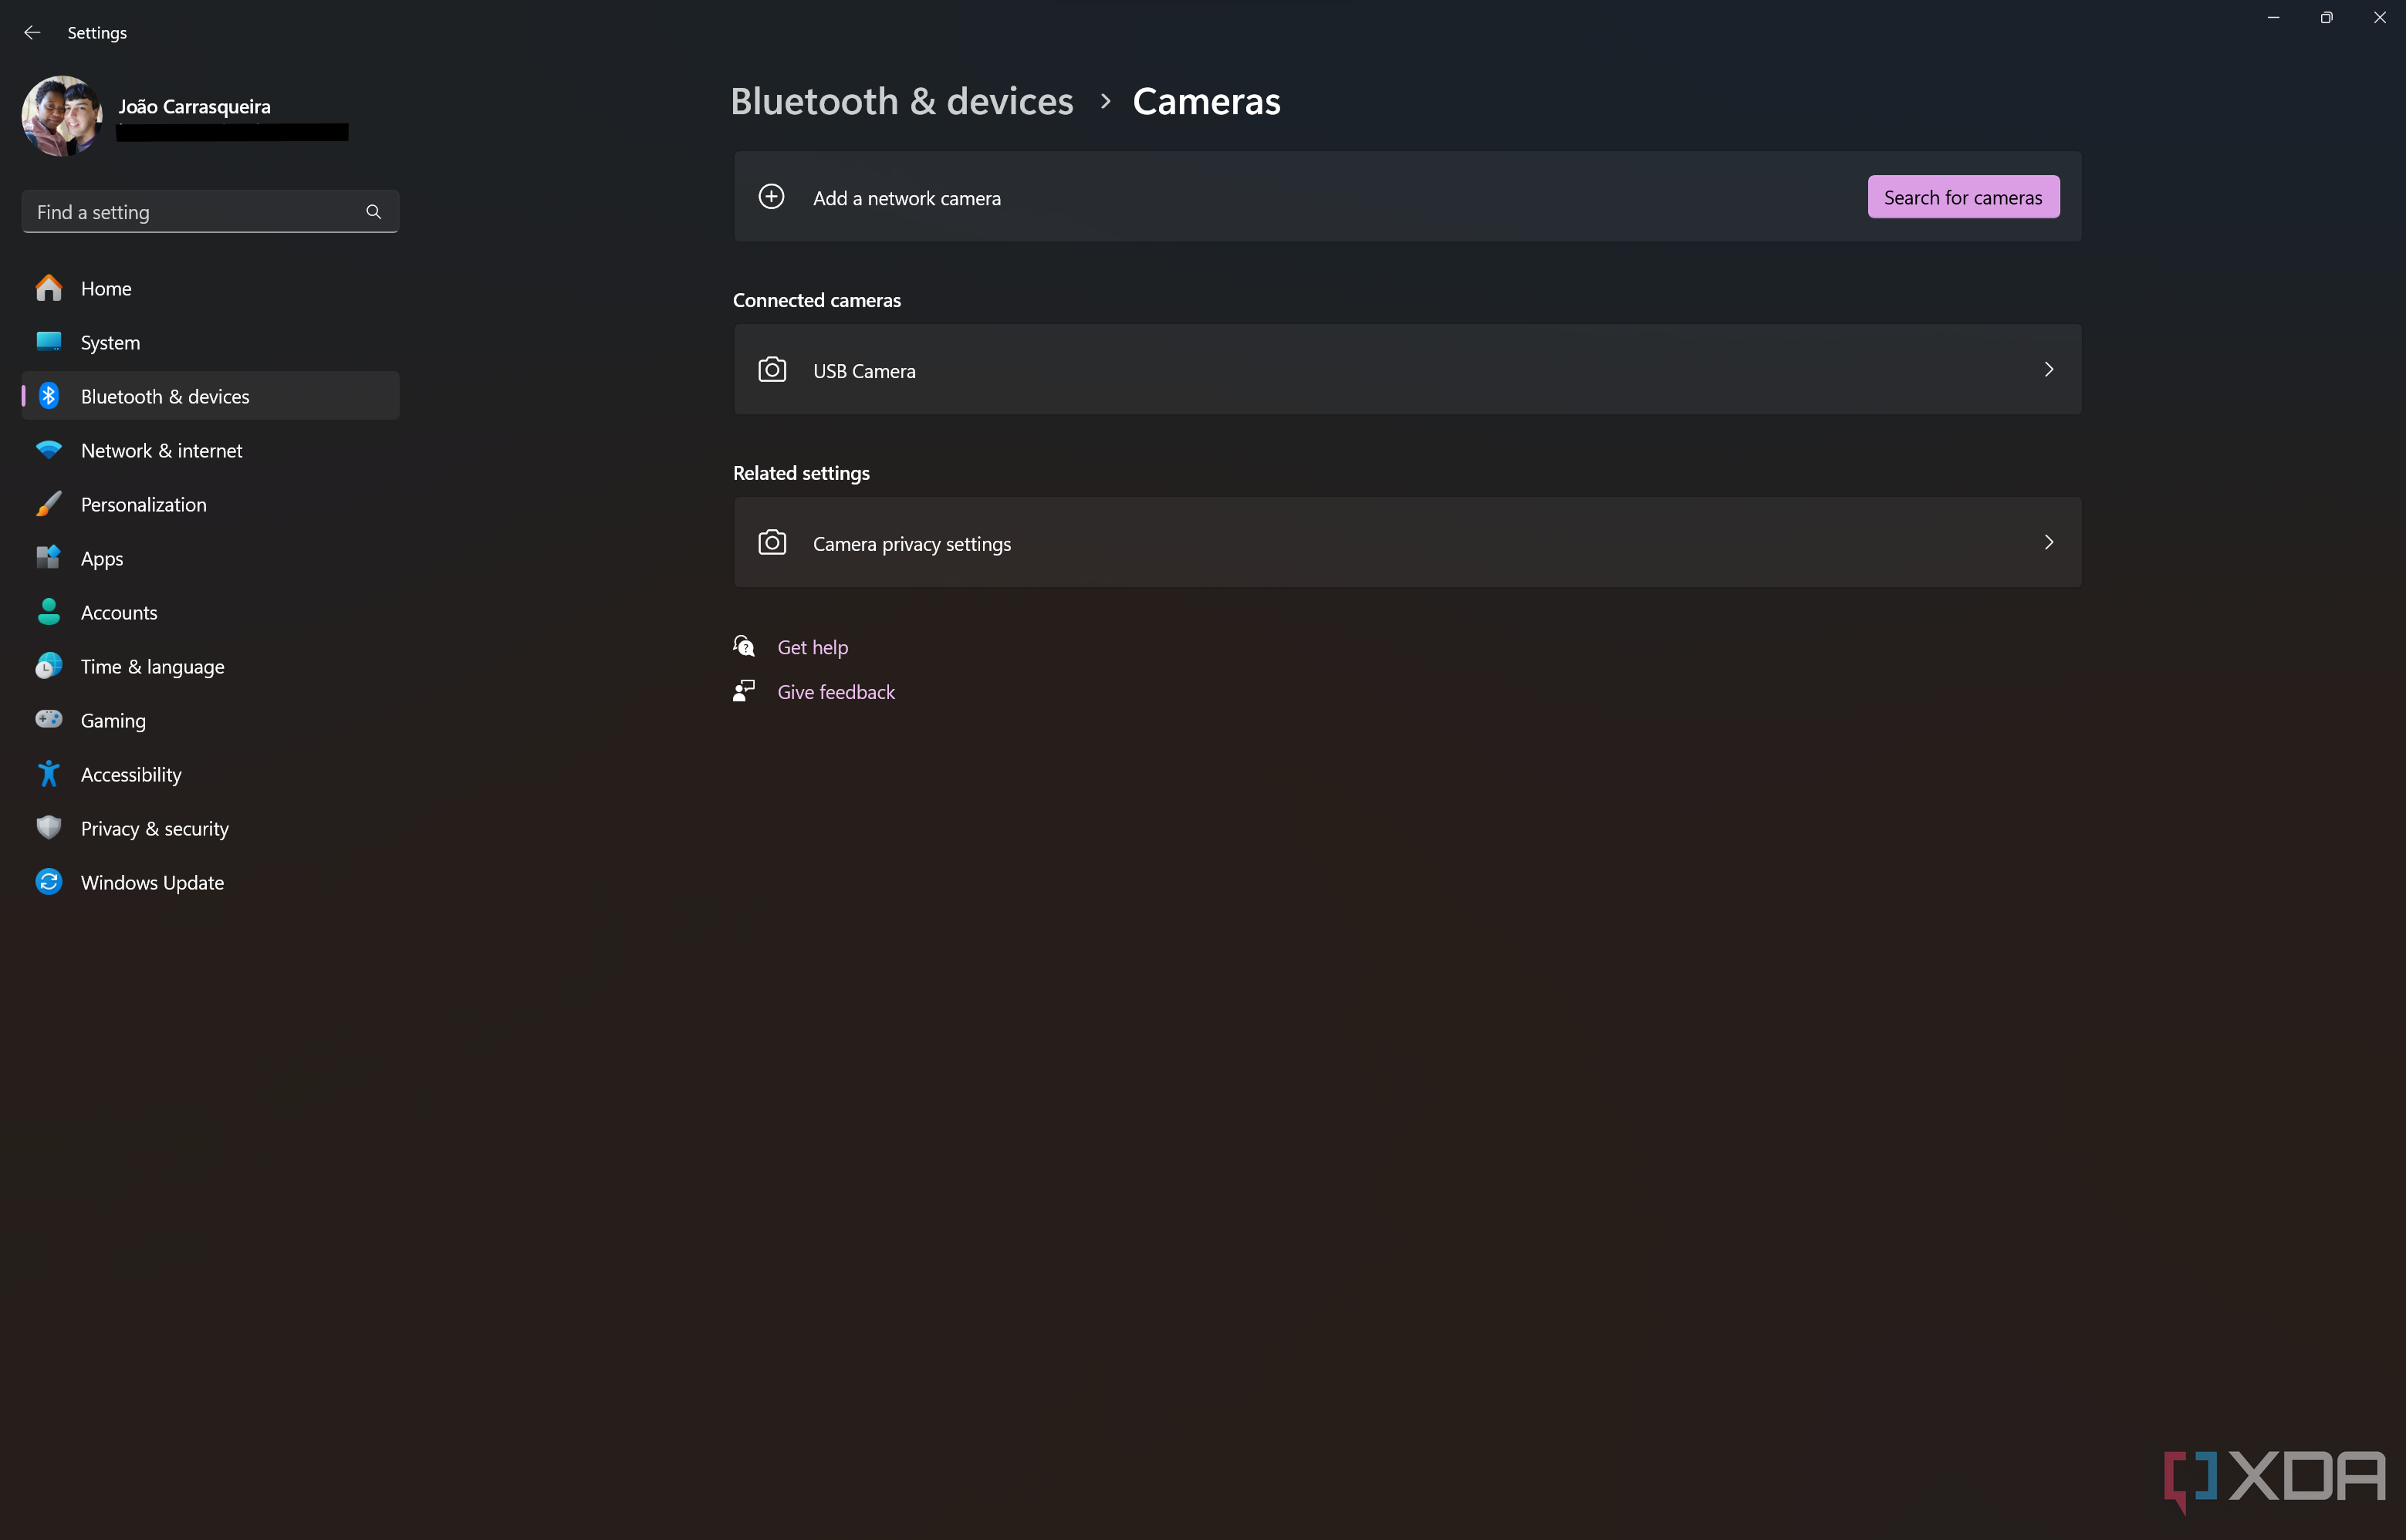 Sreenshot of Cameras page in Windows 11 Settings